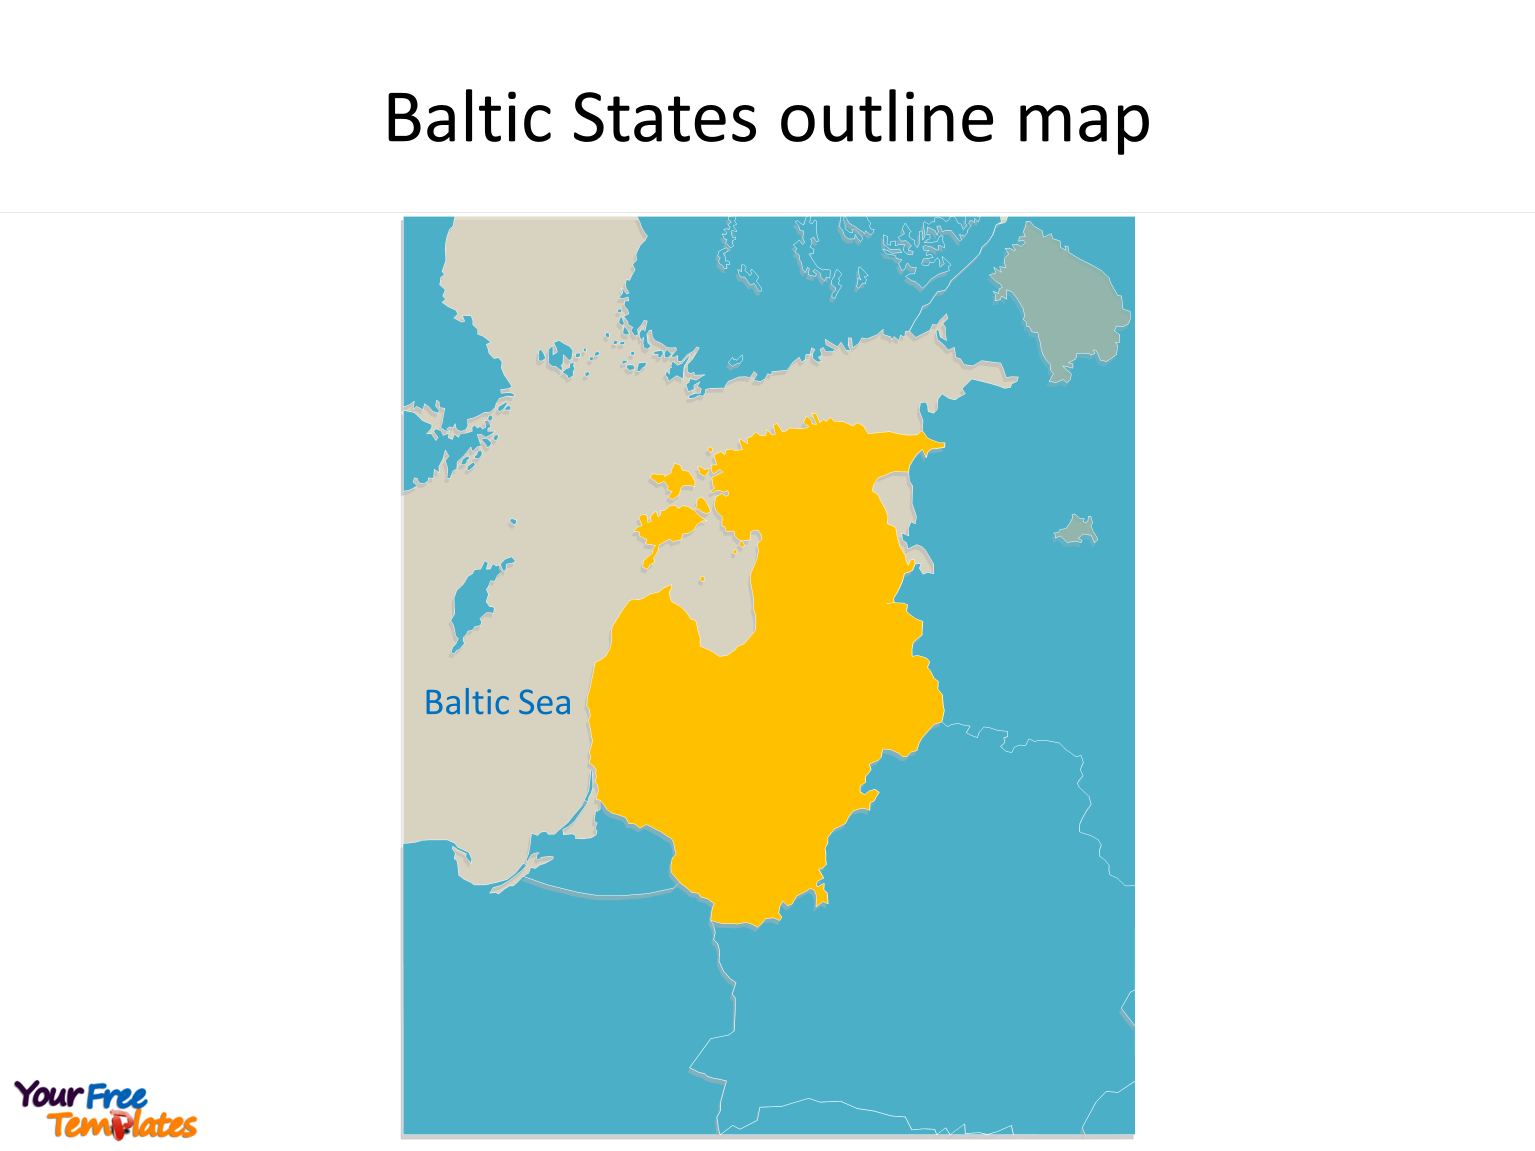 Baltic States Map with outline for the 3 countries on the Baltic Sea map in our free templates